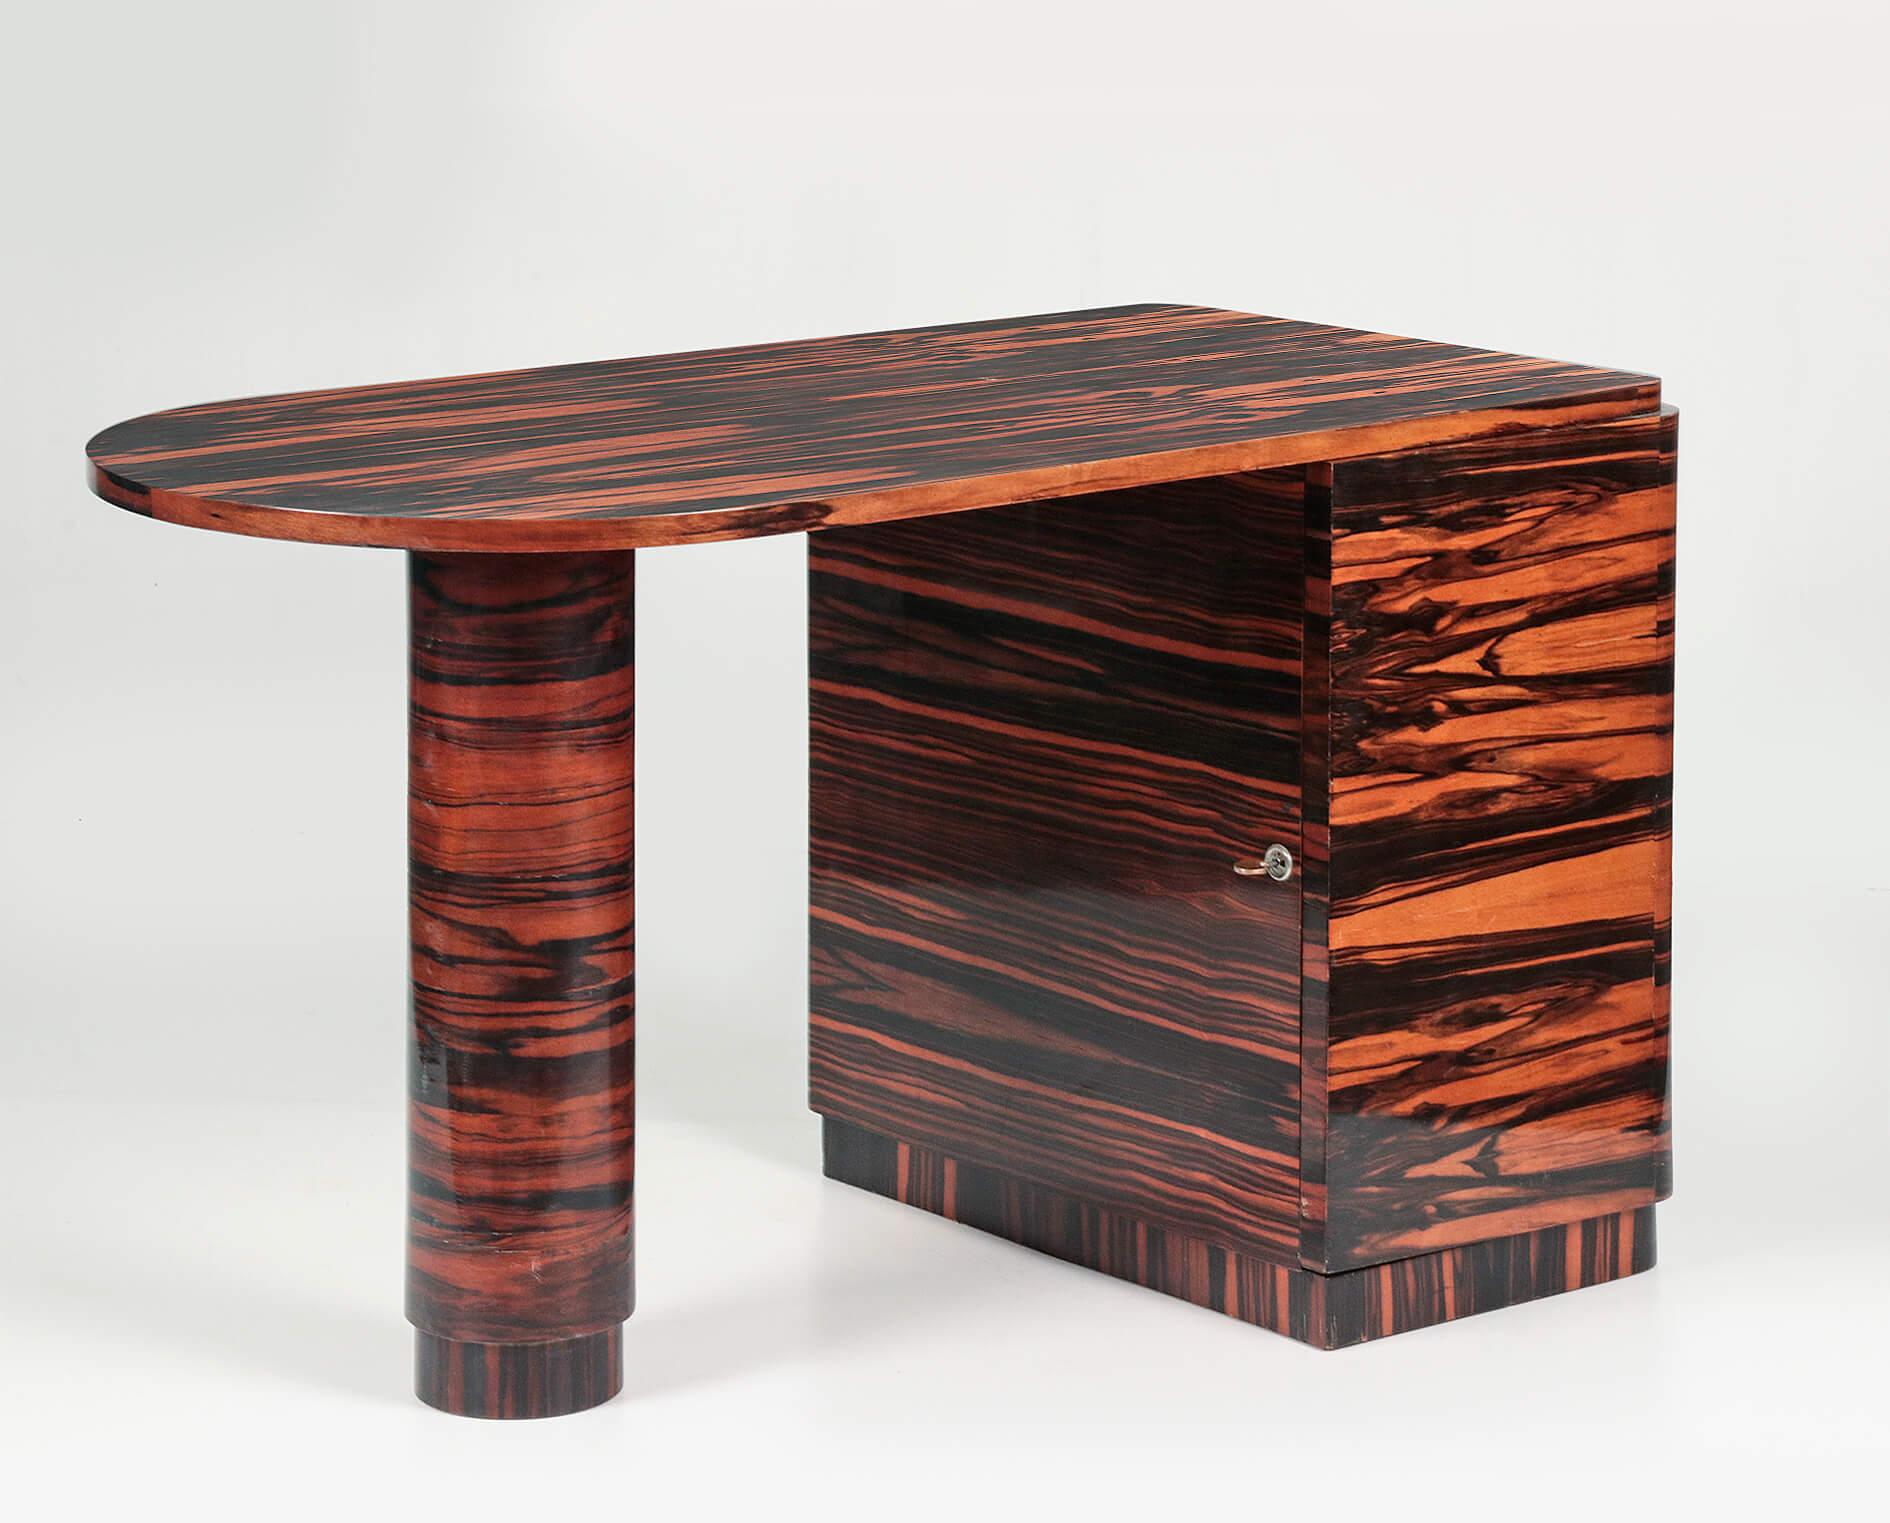 A stylish designed midcentury desk. The whole is veneered with Coromandel / Macassar ebony wood. This hard tropical wood type has a beautiful grain and deep hazel-brown color. There are four drawers on the right side behind the door. This piece of